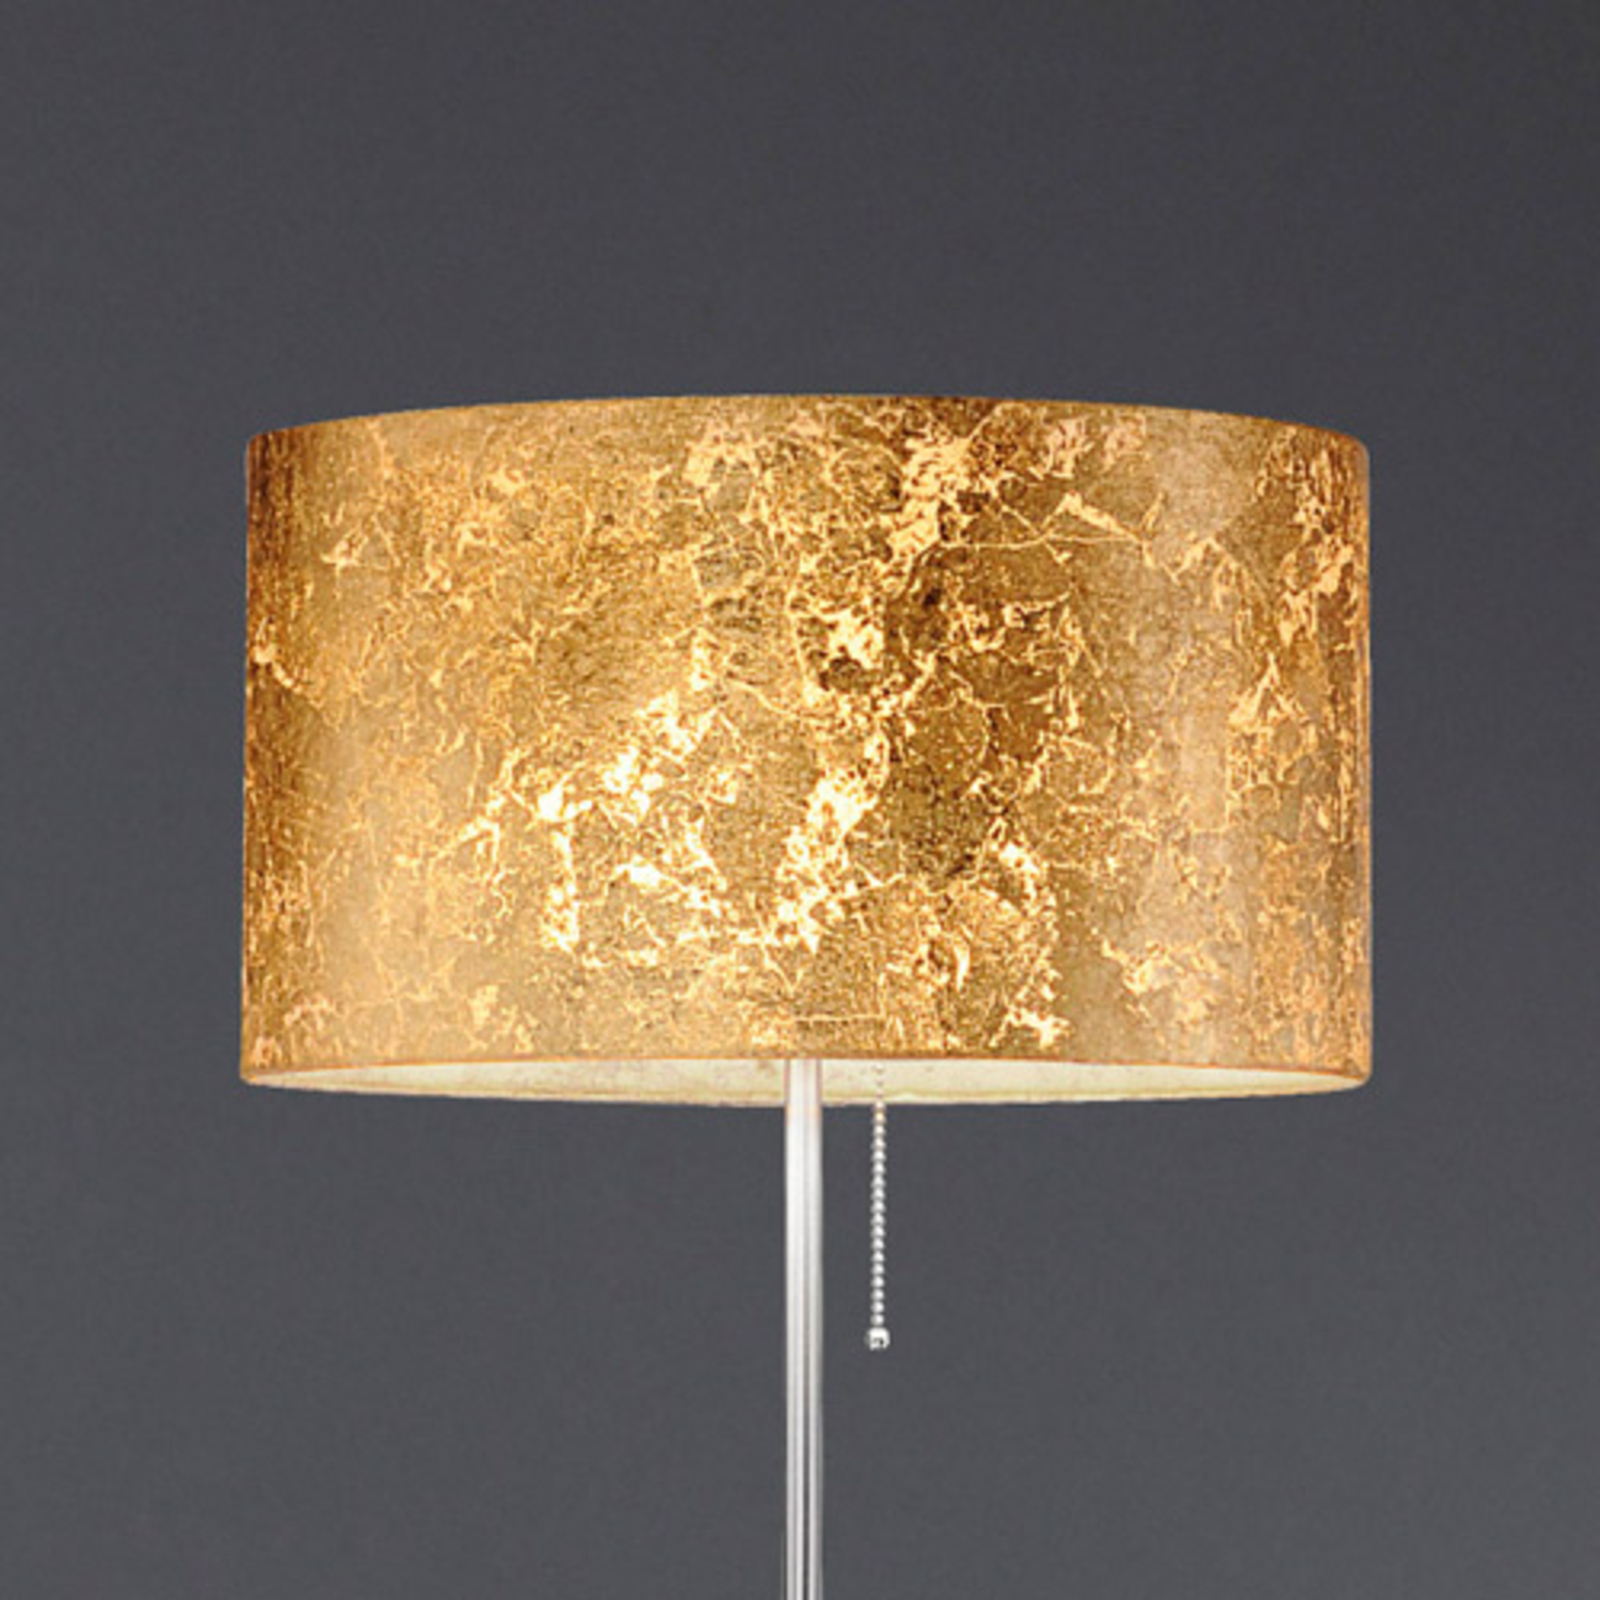 Alea Loop floor lamp with a gold leaf finish